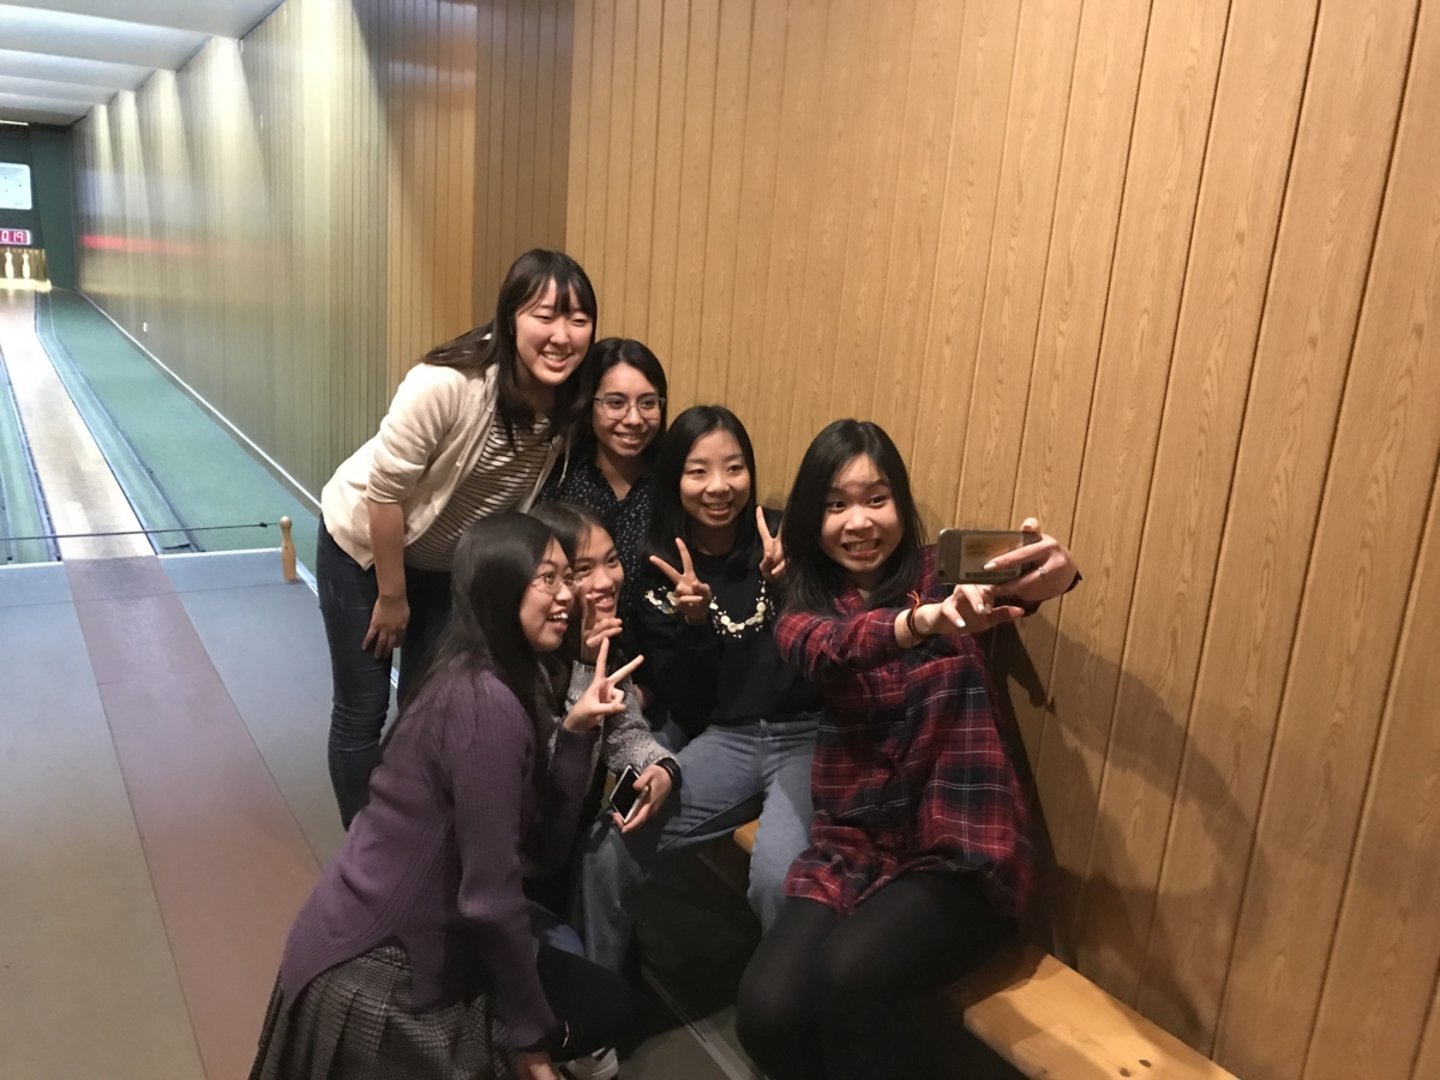 Six students taking a selfie at the bowling alley.